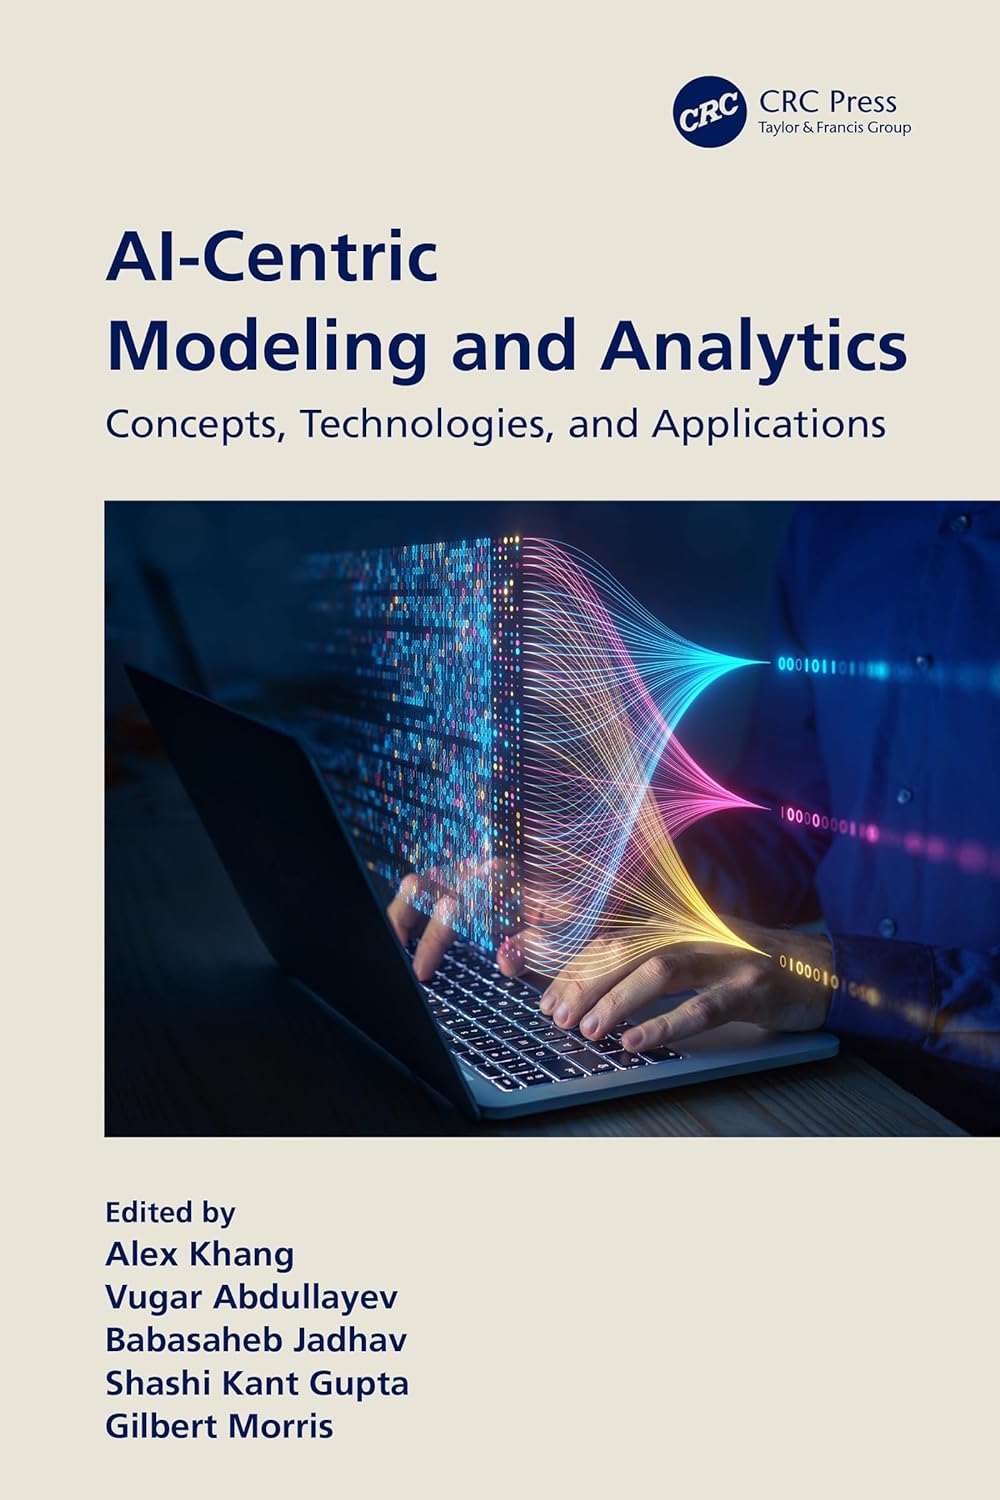 AI-Centric Modelling and Analytics: Concepts, Designs, Technologies, and Applications